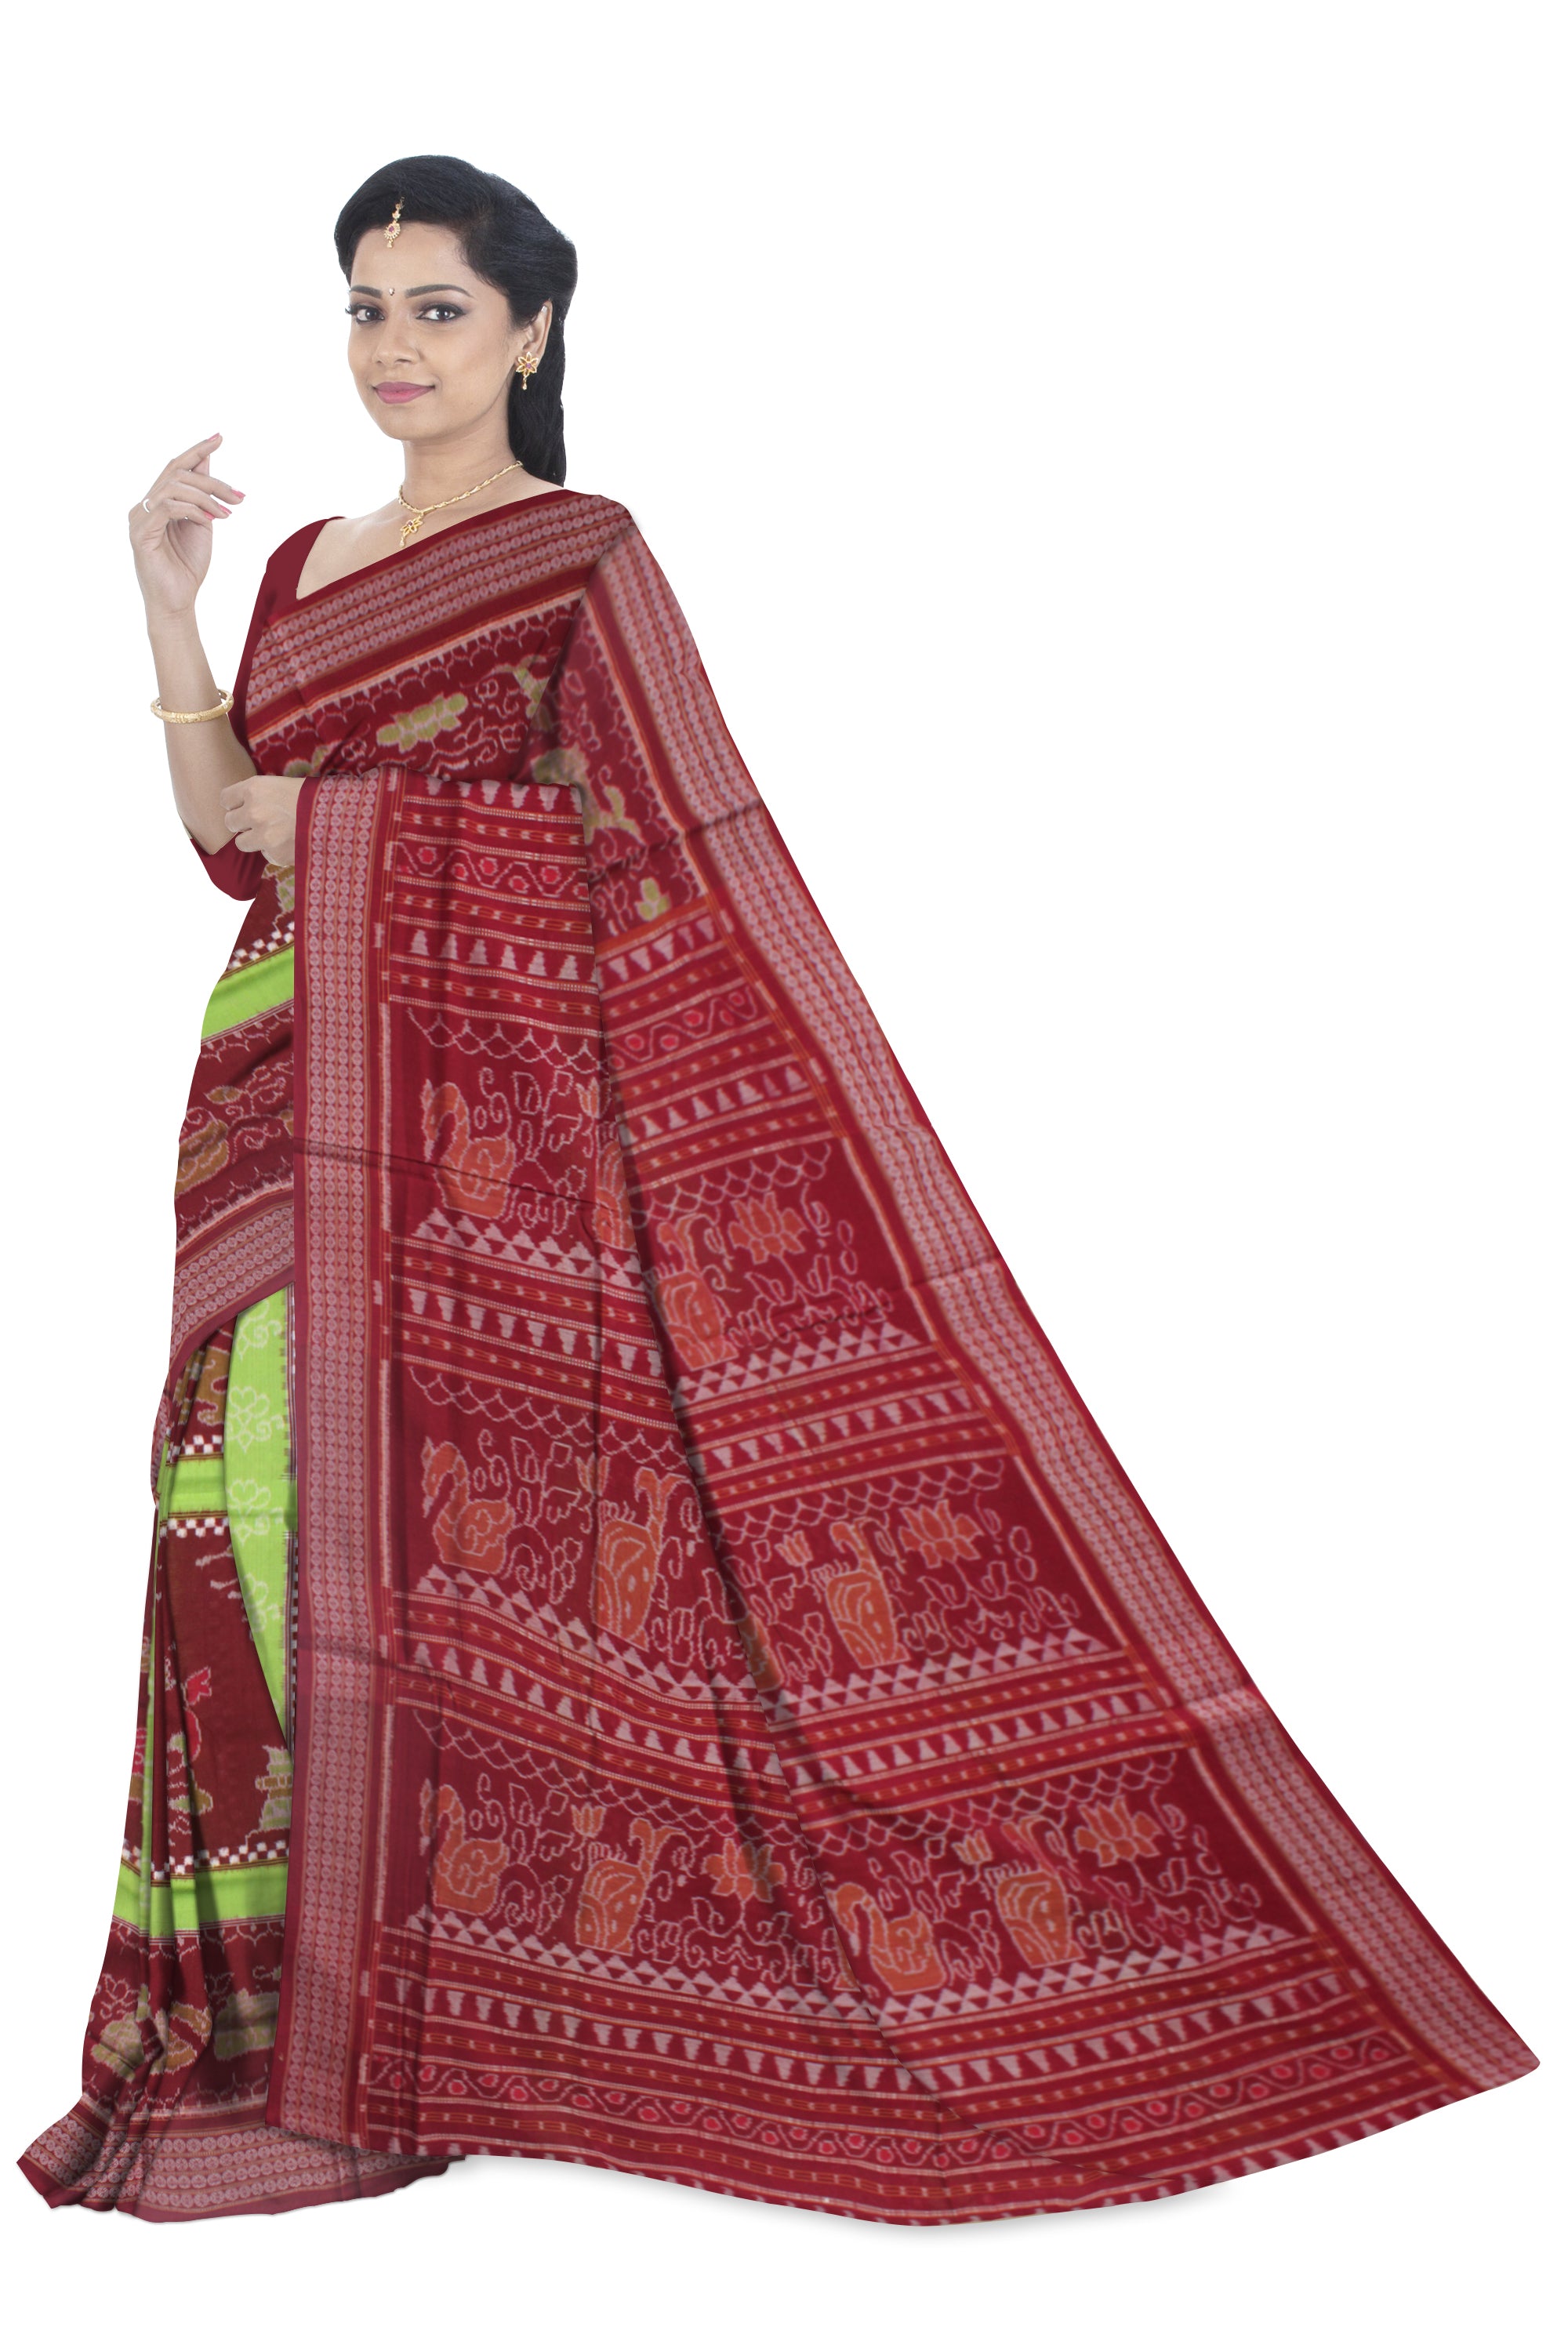 LIGHT GREEN AND MAROON COLOR BOX PATTERN PURE COTTON SAREE IS DESIGN LIKE- NARTAKI,LION AND BIRD PATTERN,WITHOUT BLOUSE PIECE. - Koshali Arts & Crafts Enterprise